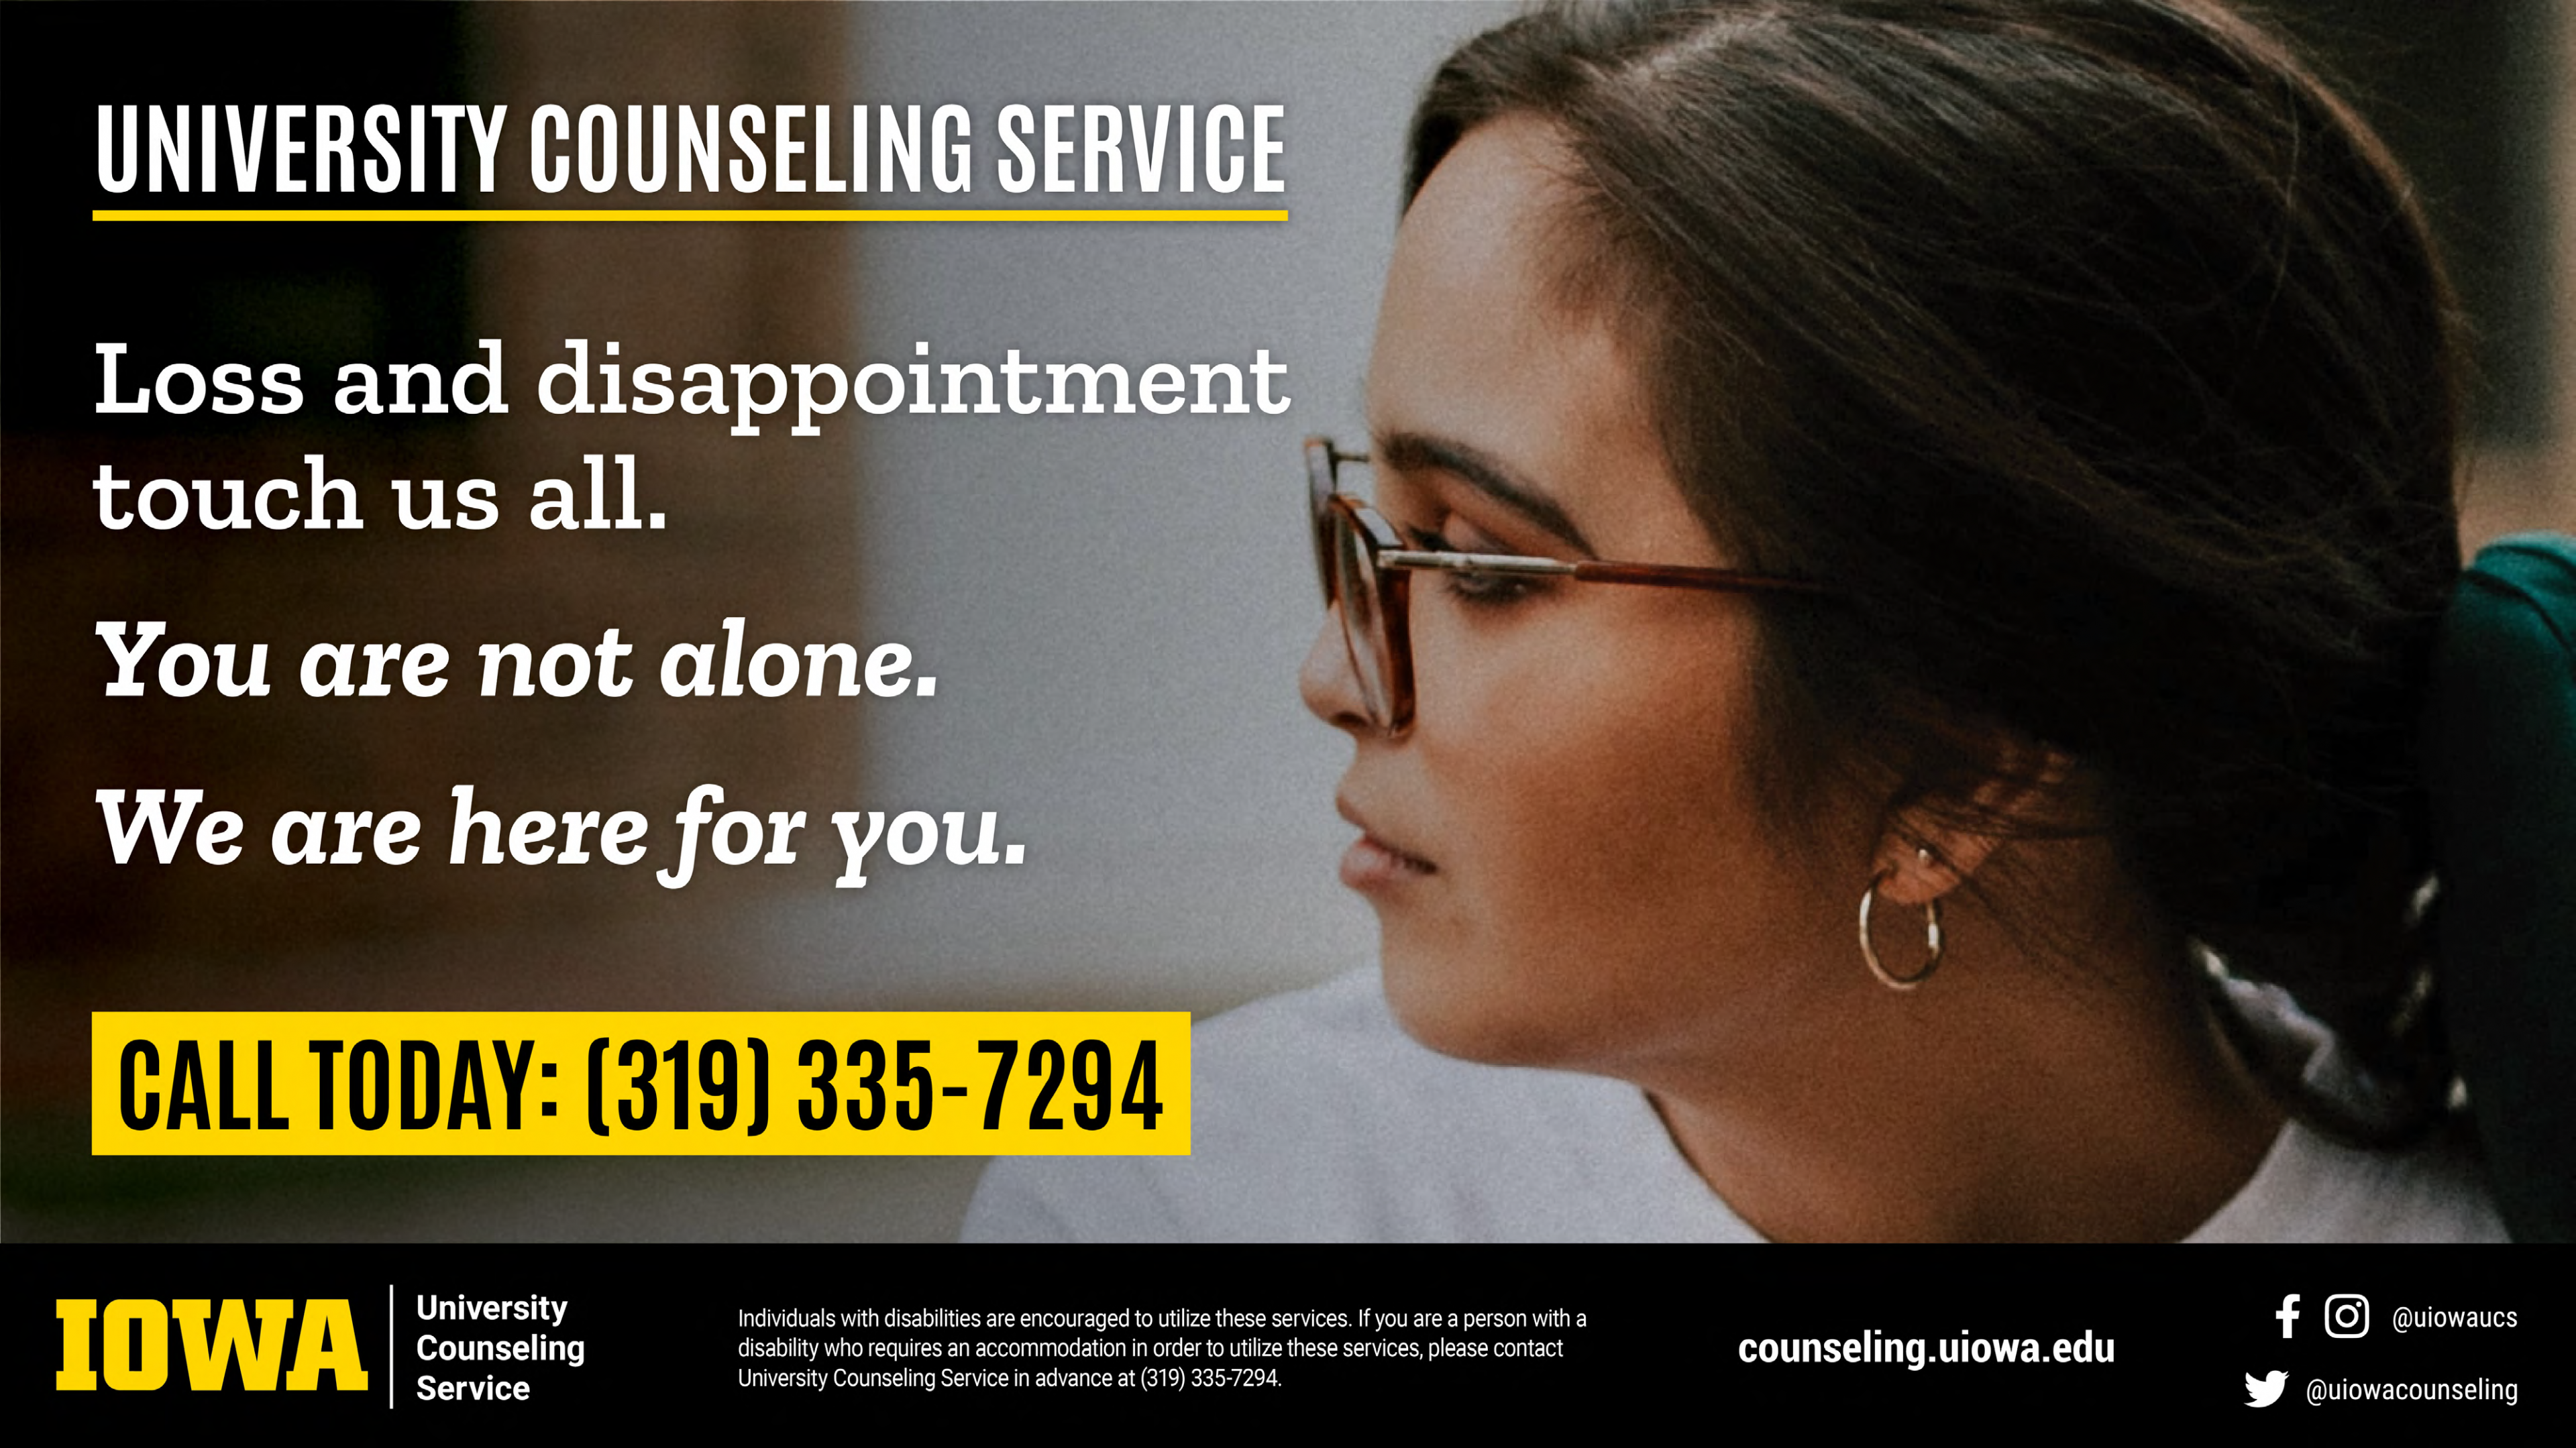 University Counseling Service image of someone looking to the left